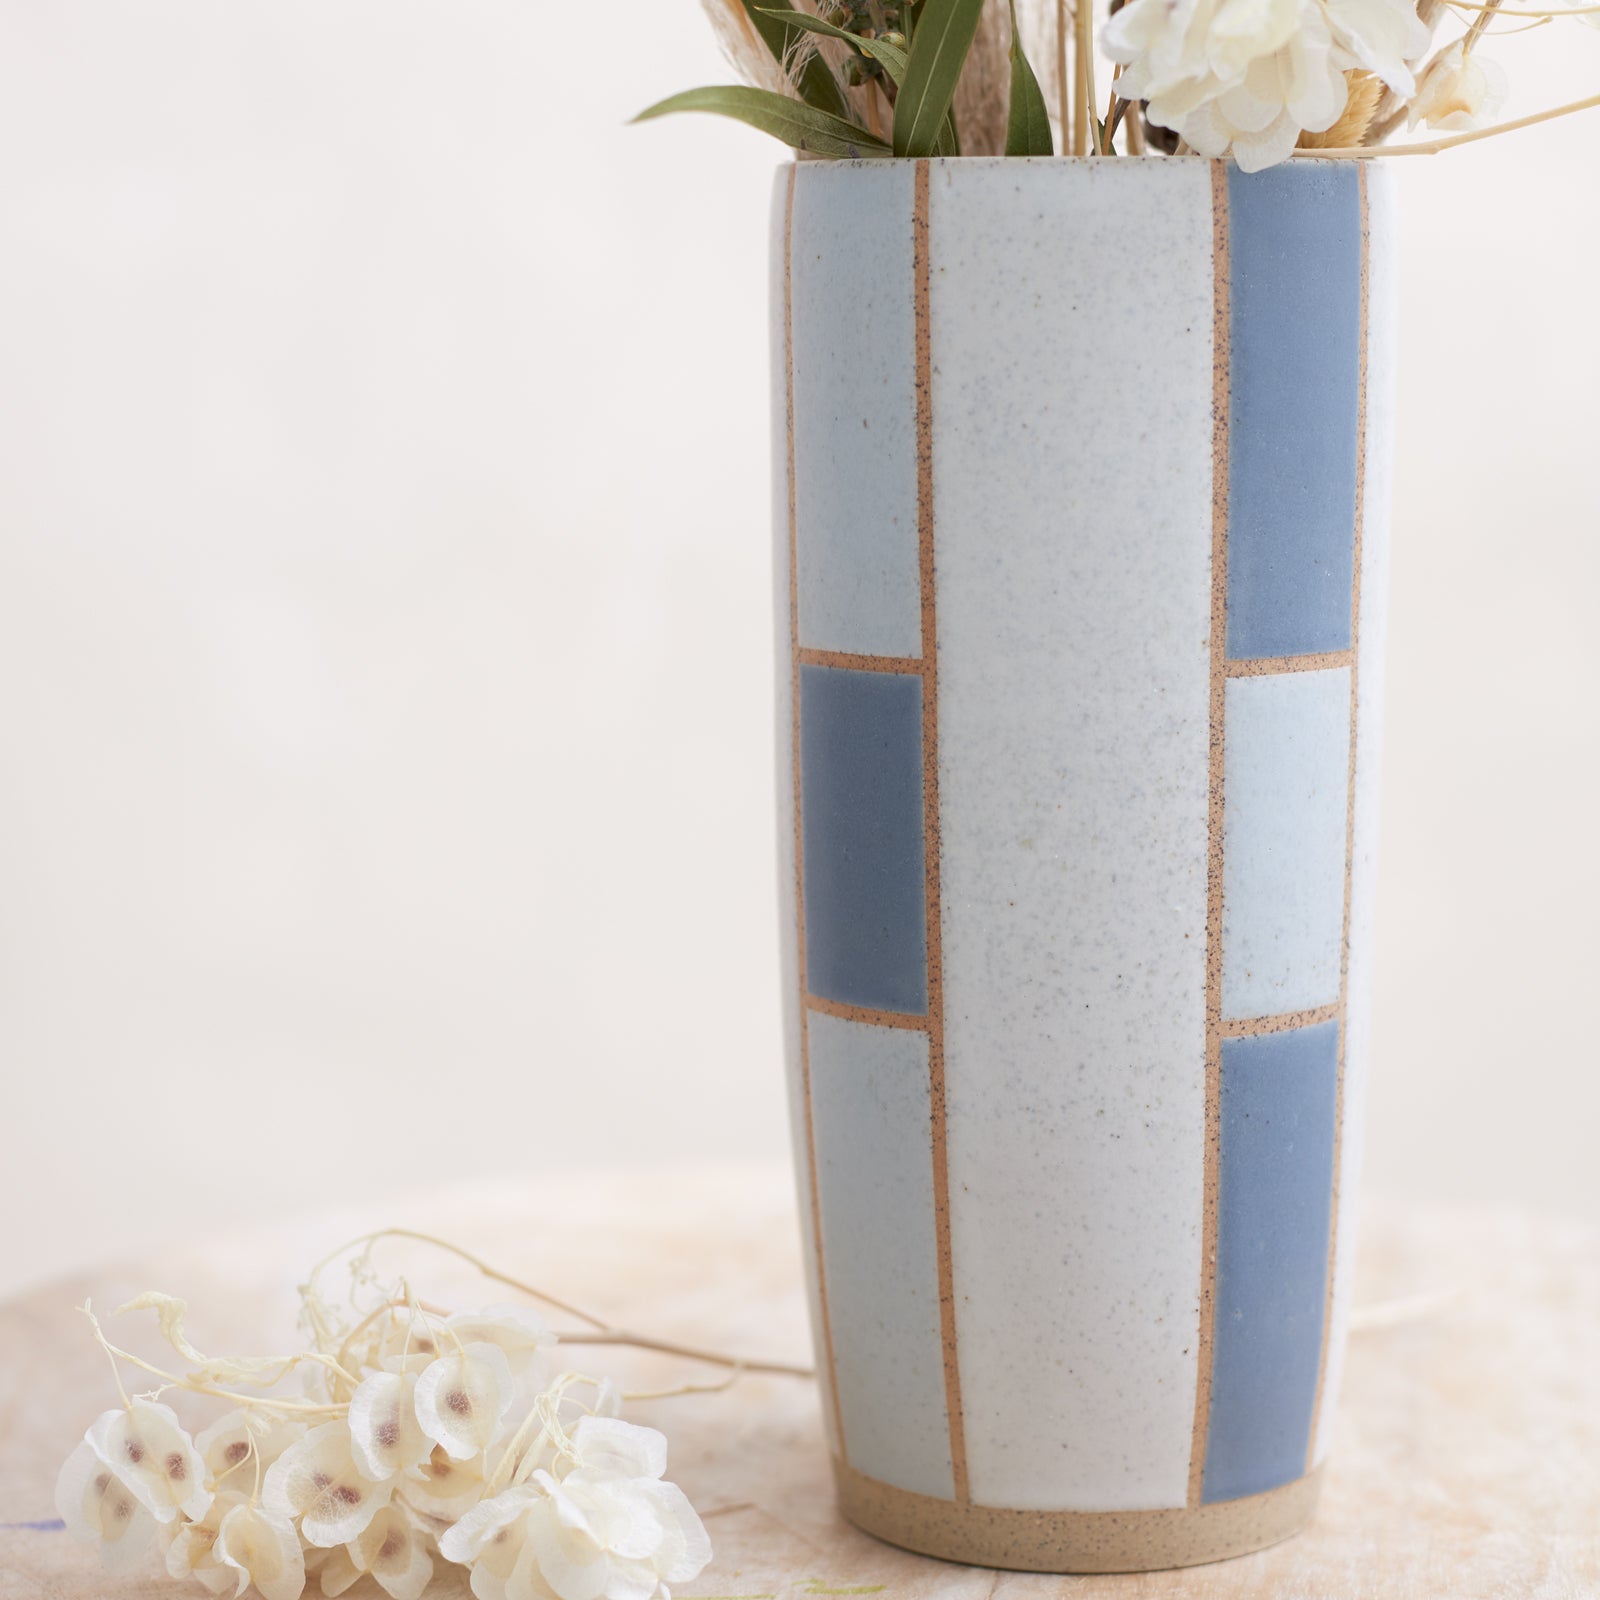 A close-up view of the Geometric Tapered Handmade Ceramic Vase in dark blue and grey glaze. The ceramic vase sits on a wooden stool holding dried flowers. The handmade vase is in a coastal-styled setting.